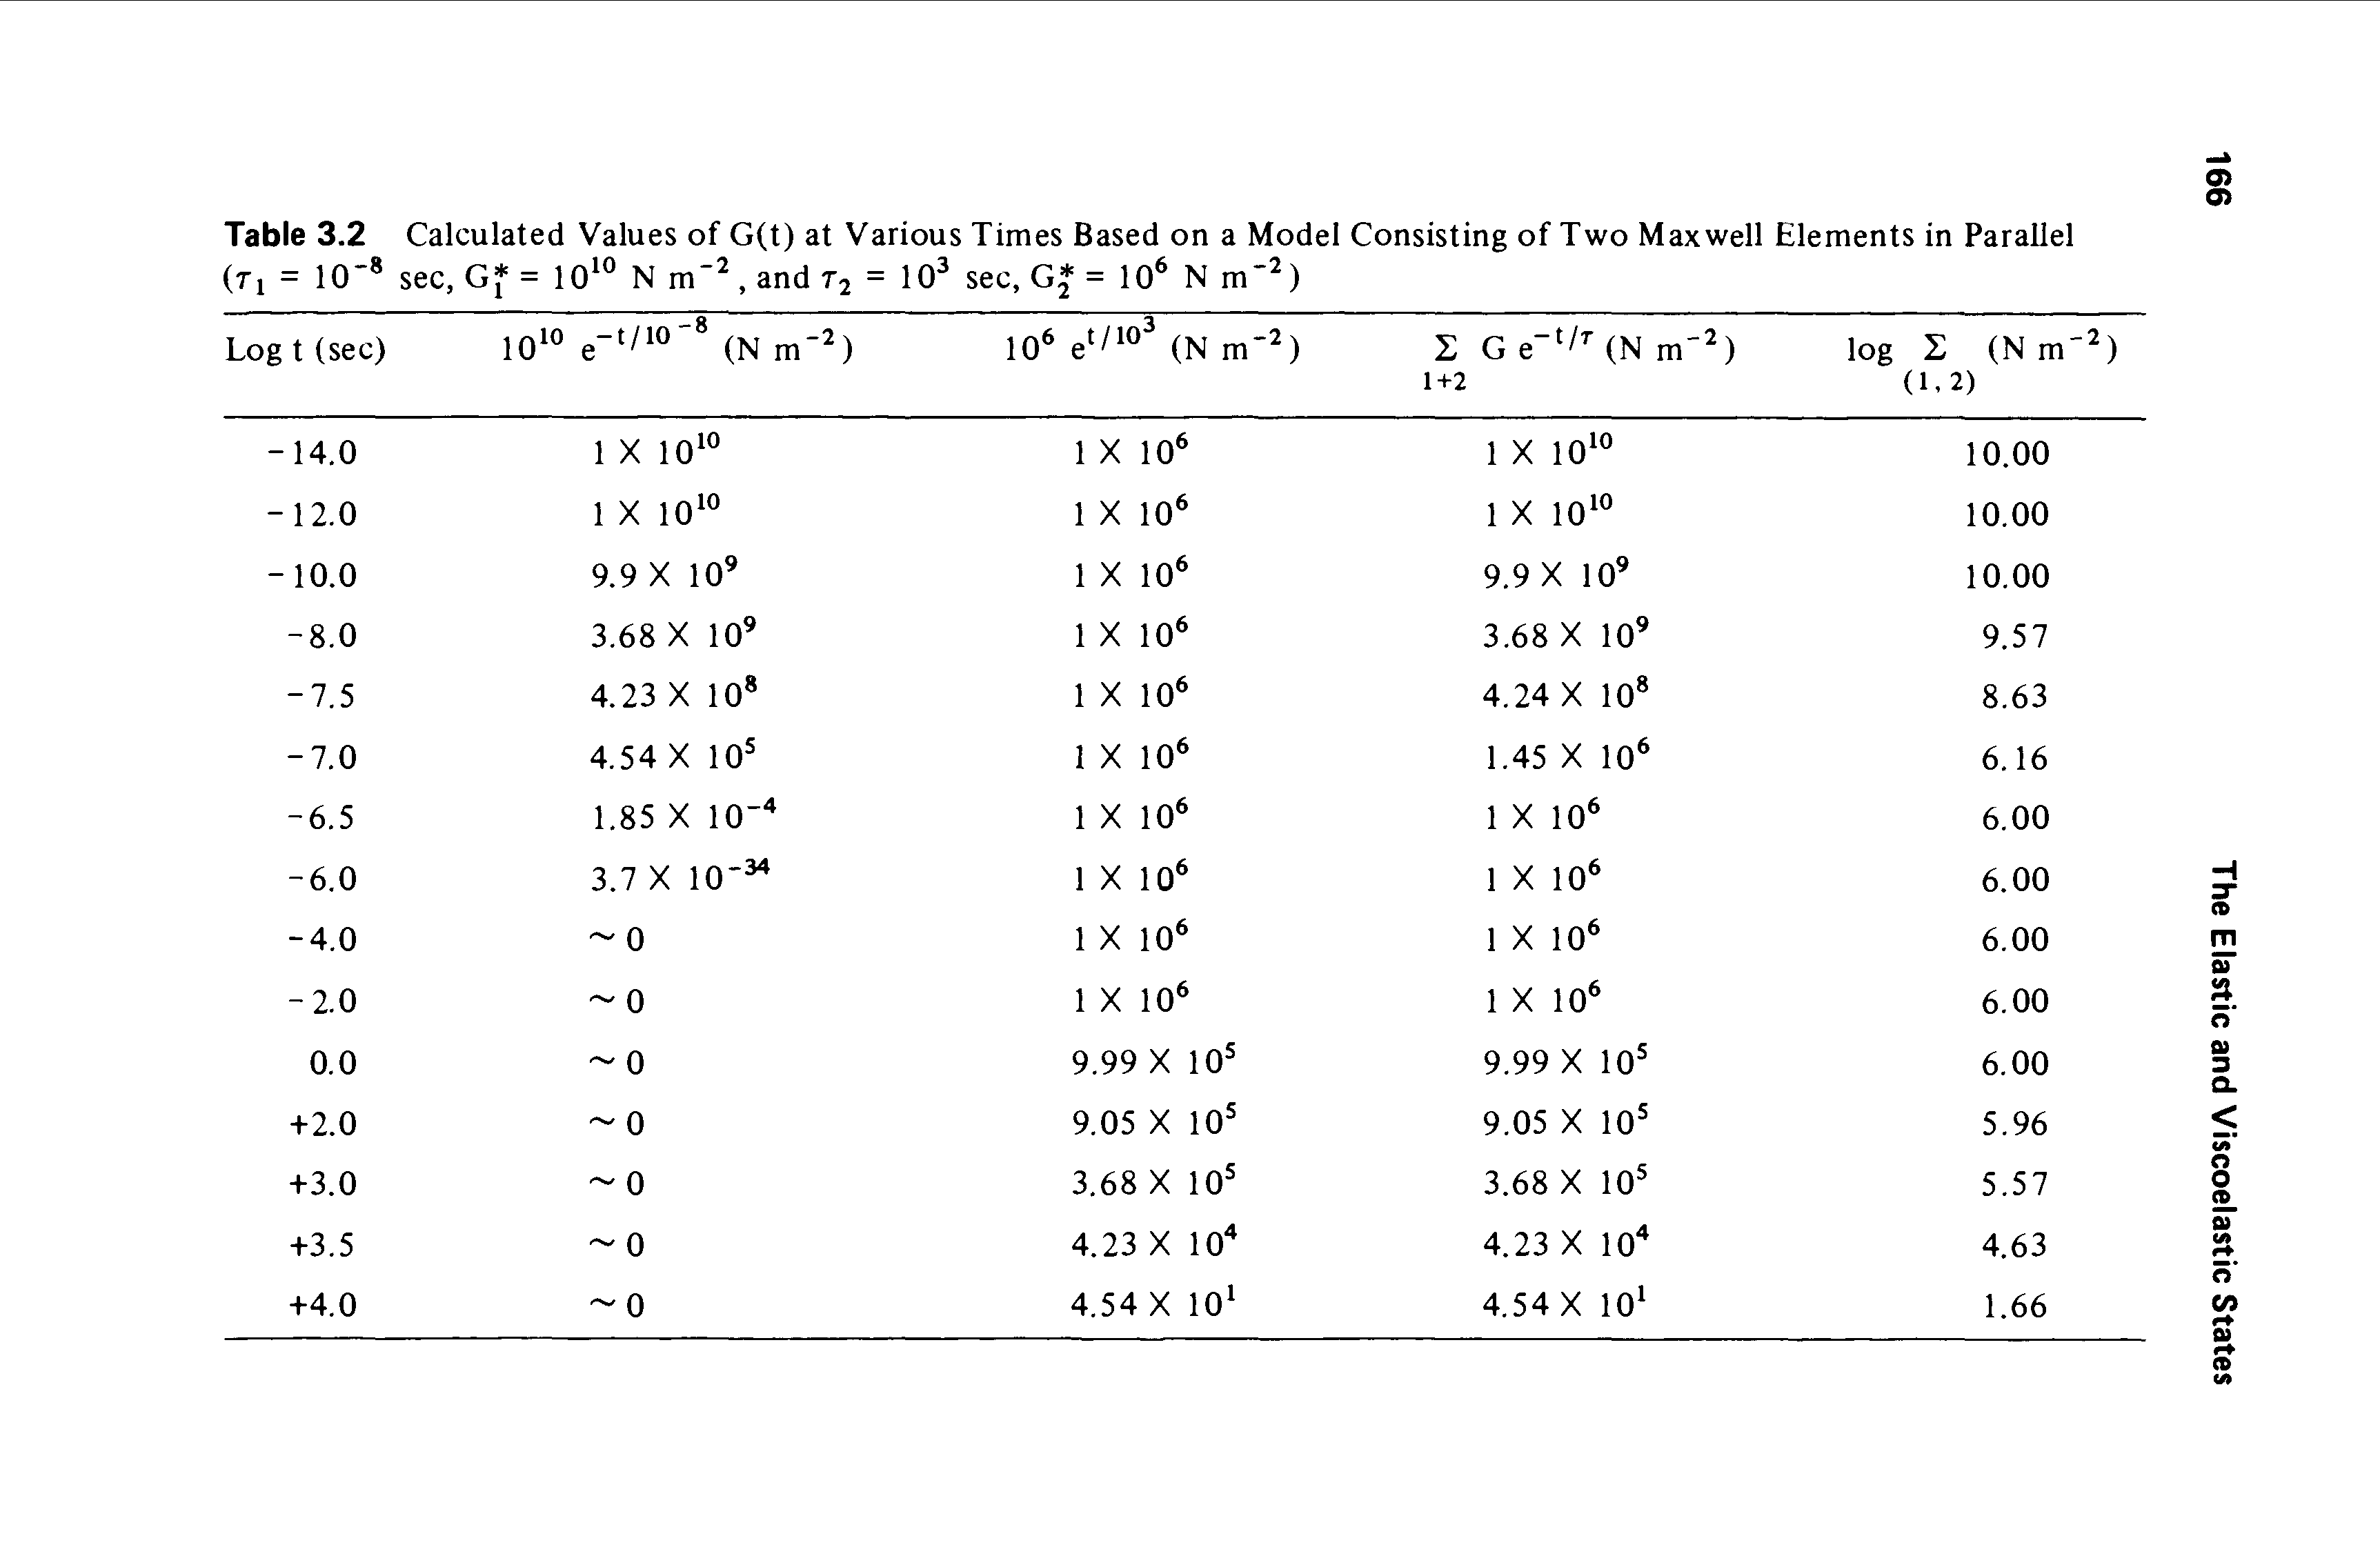 Table 3.2 Calculated Values of G(t) at Various Times Based on a Model Consisting of Two Maxwell Elements in Parallel...